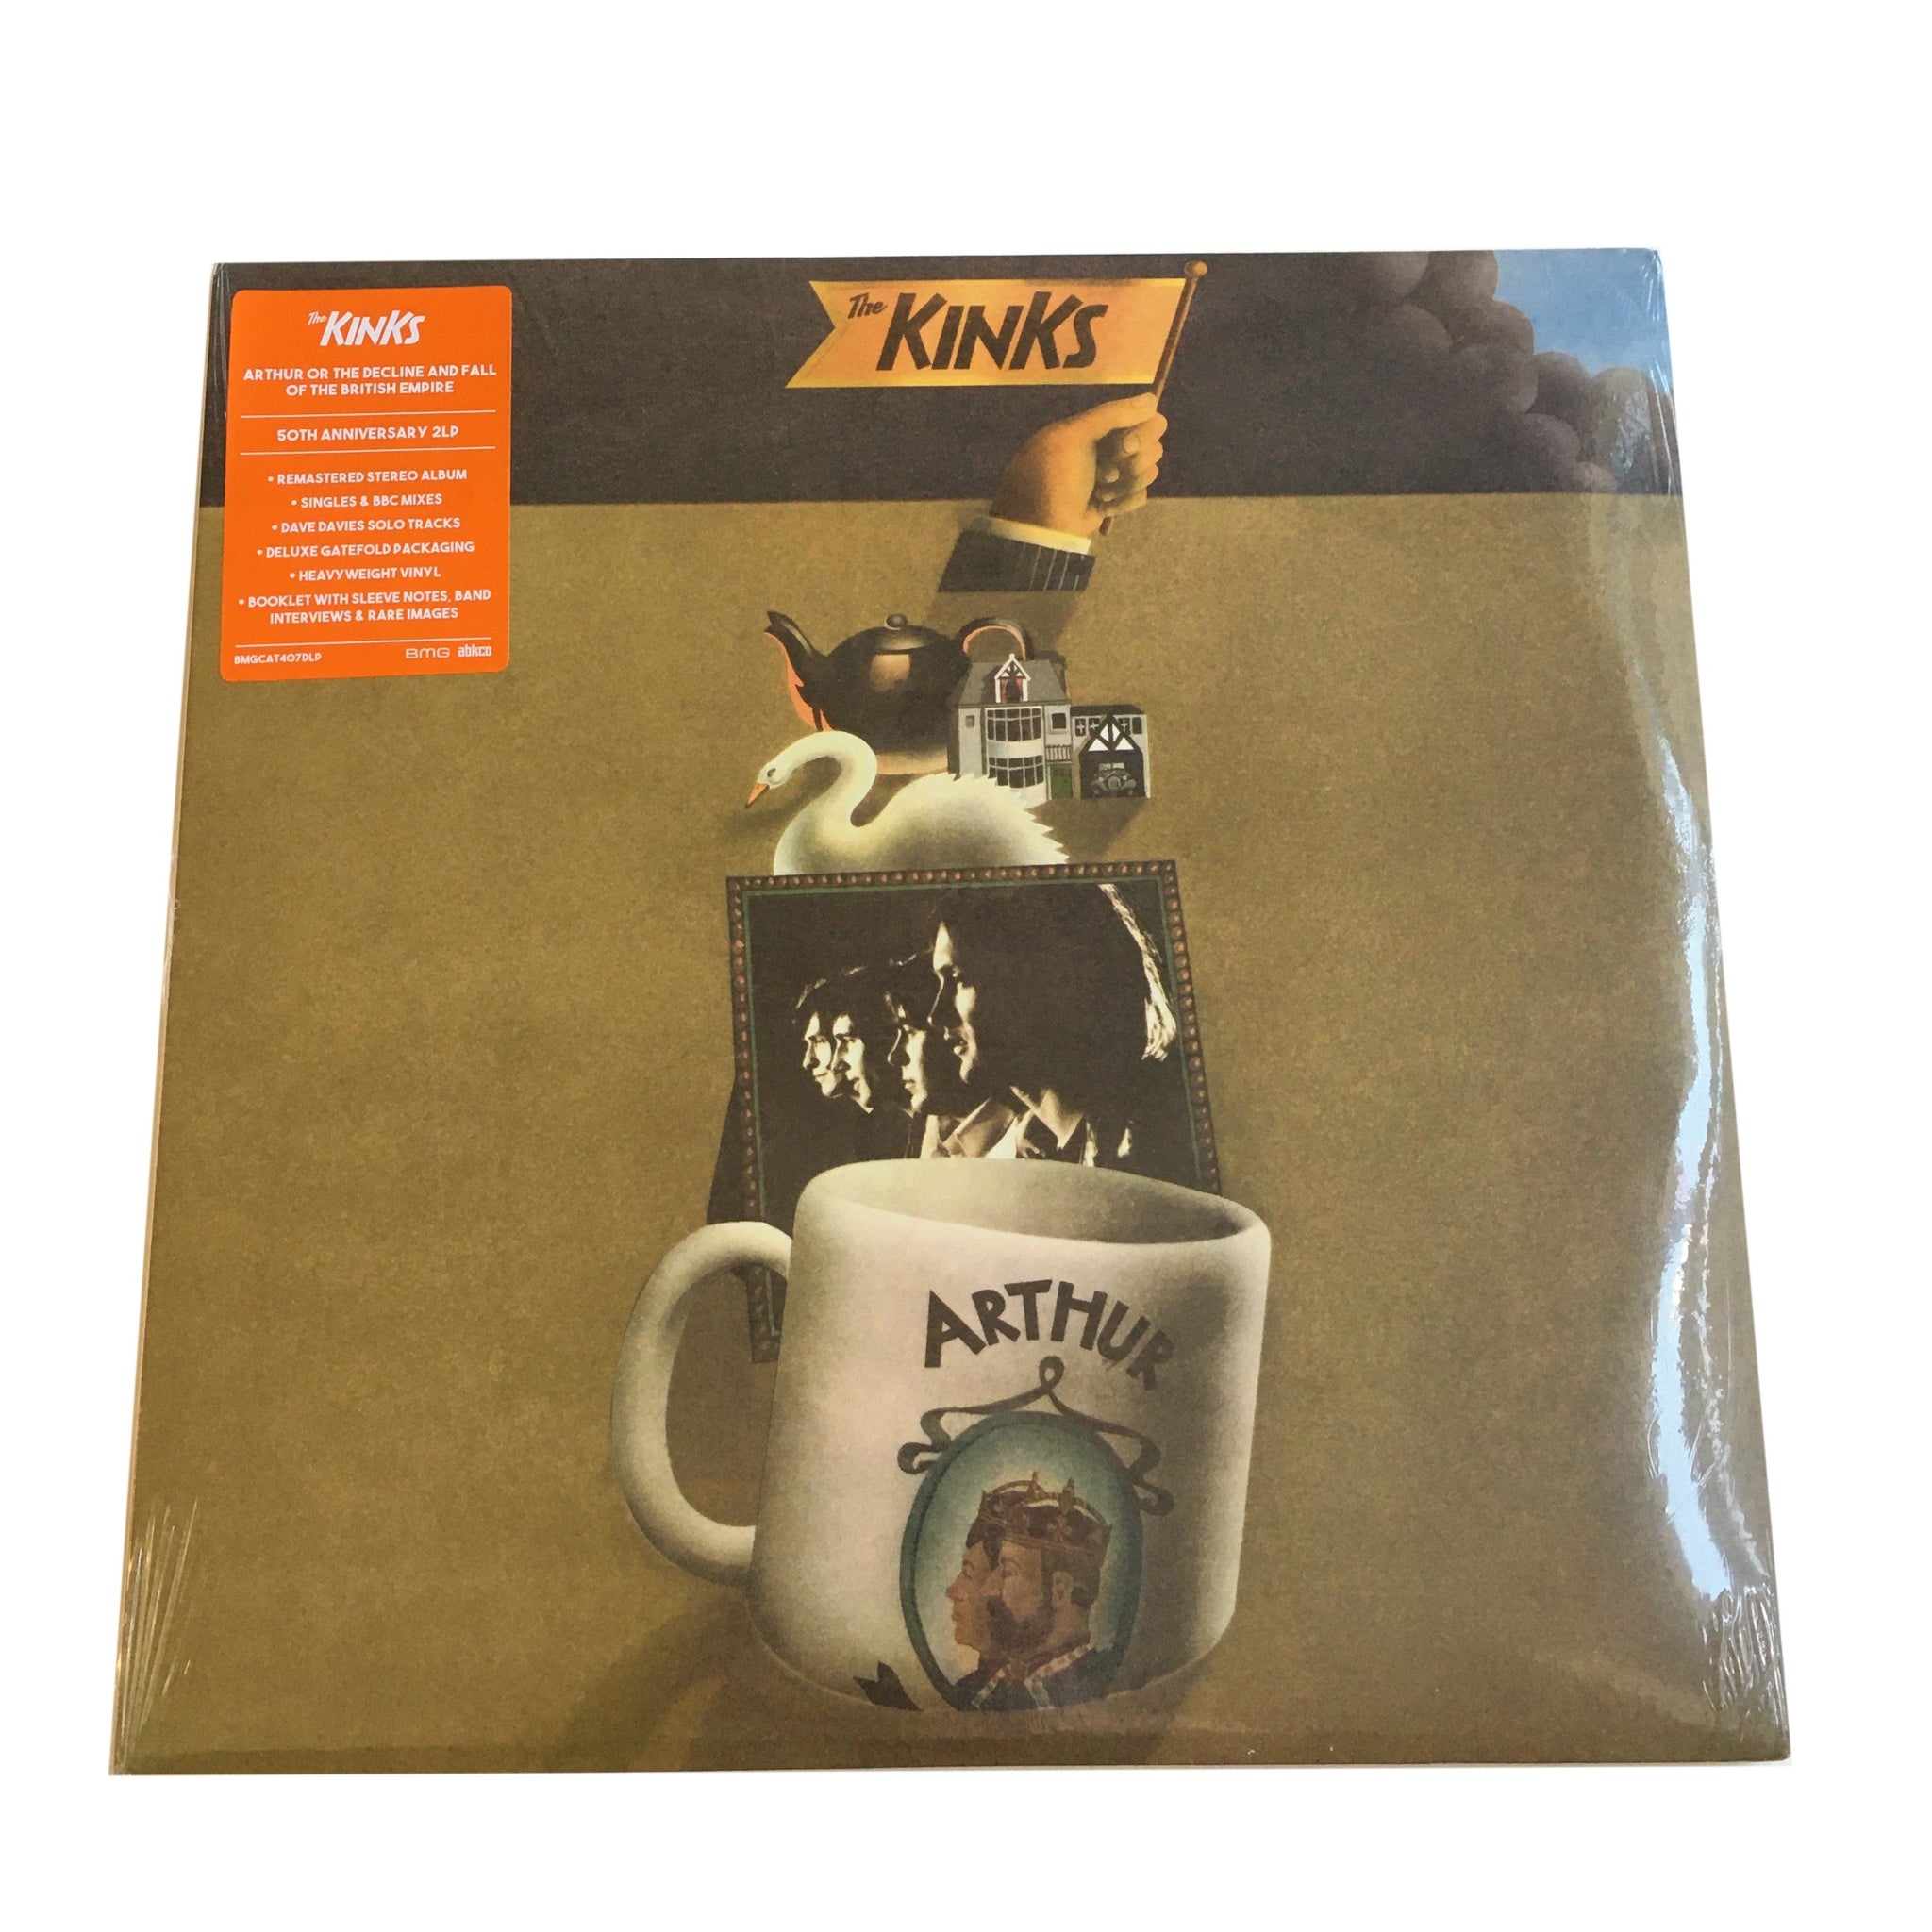 THE KINKS- ARTHUR OR THE DECLINE AND FALL OF THE BRITISH EMPIRE - 50TH ANNIVERSARY 2LP VINYL - Wah Wah Records